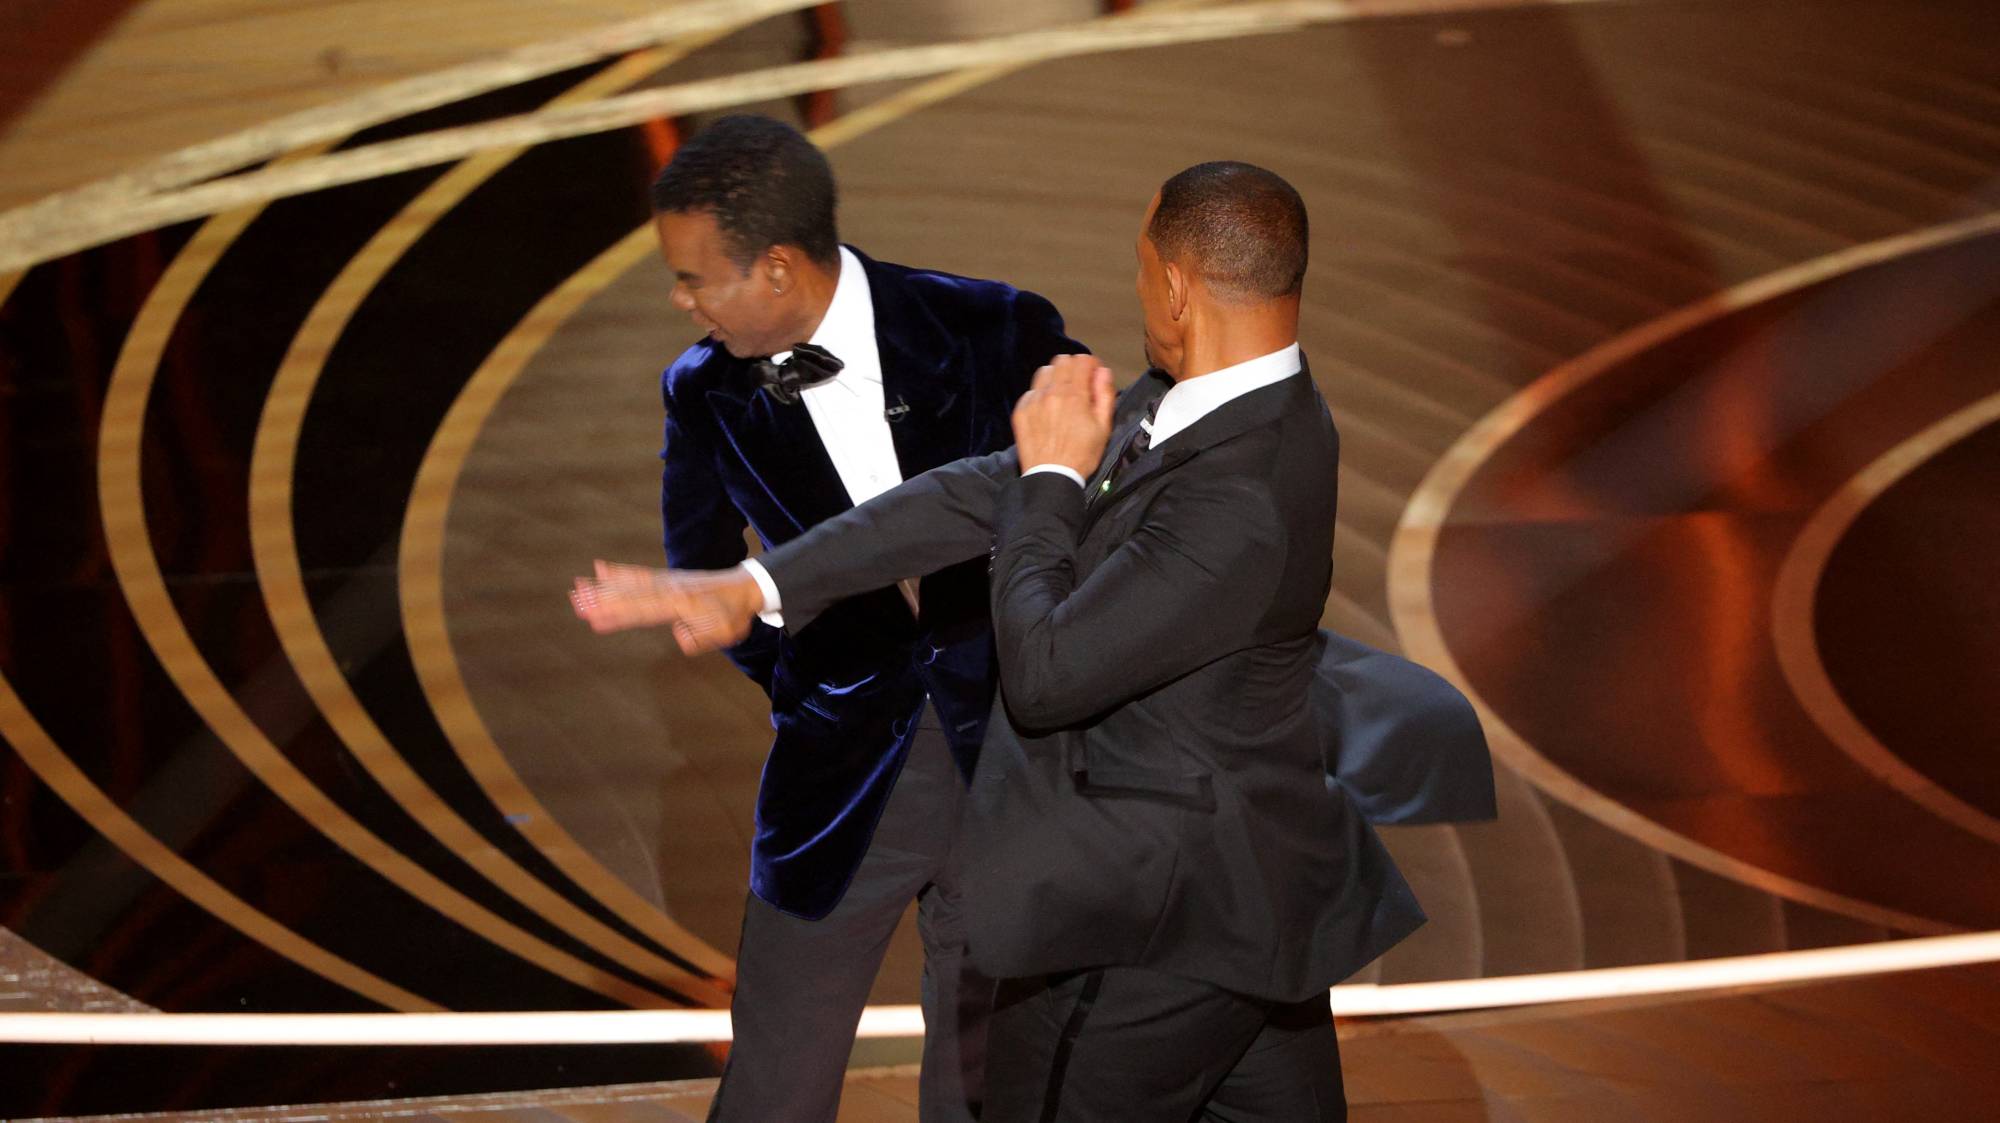 Chris Rock and Will Smith. PHOTO/COURTESY